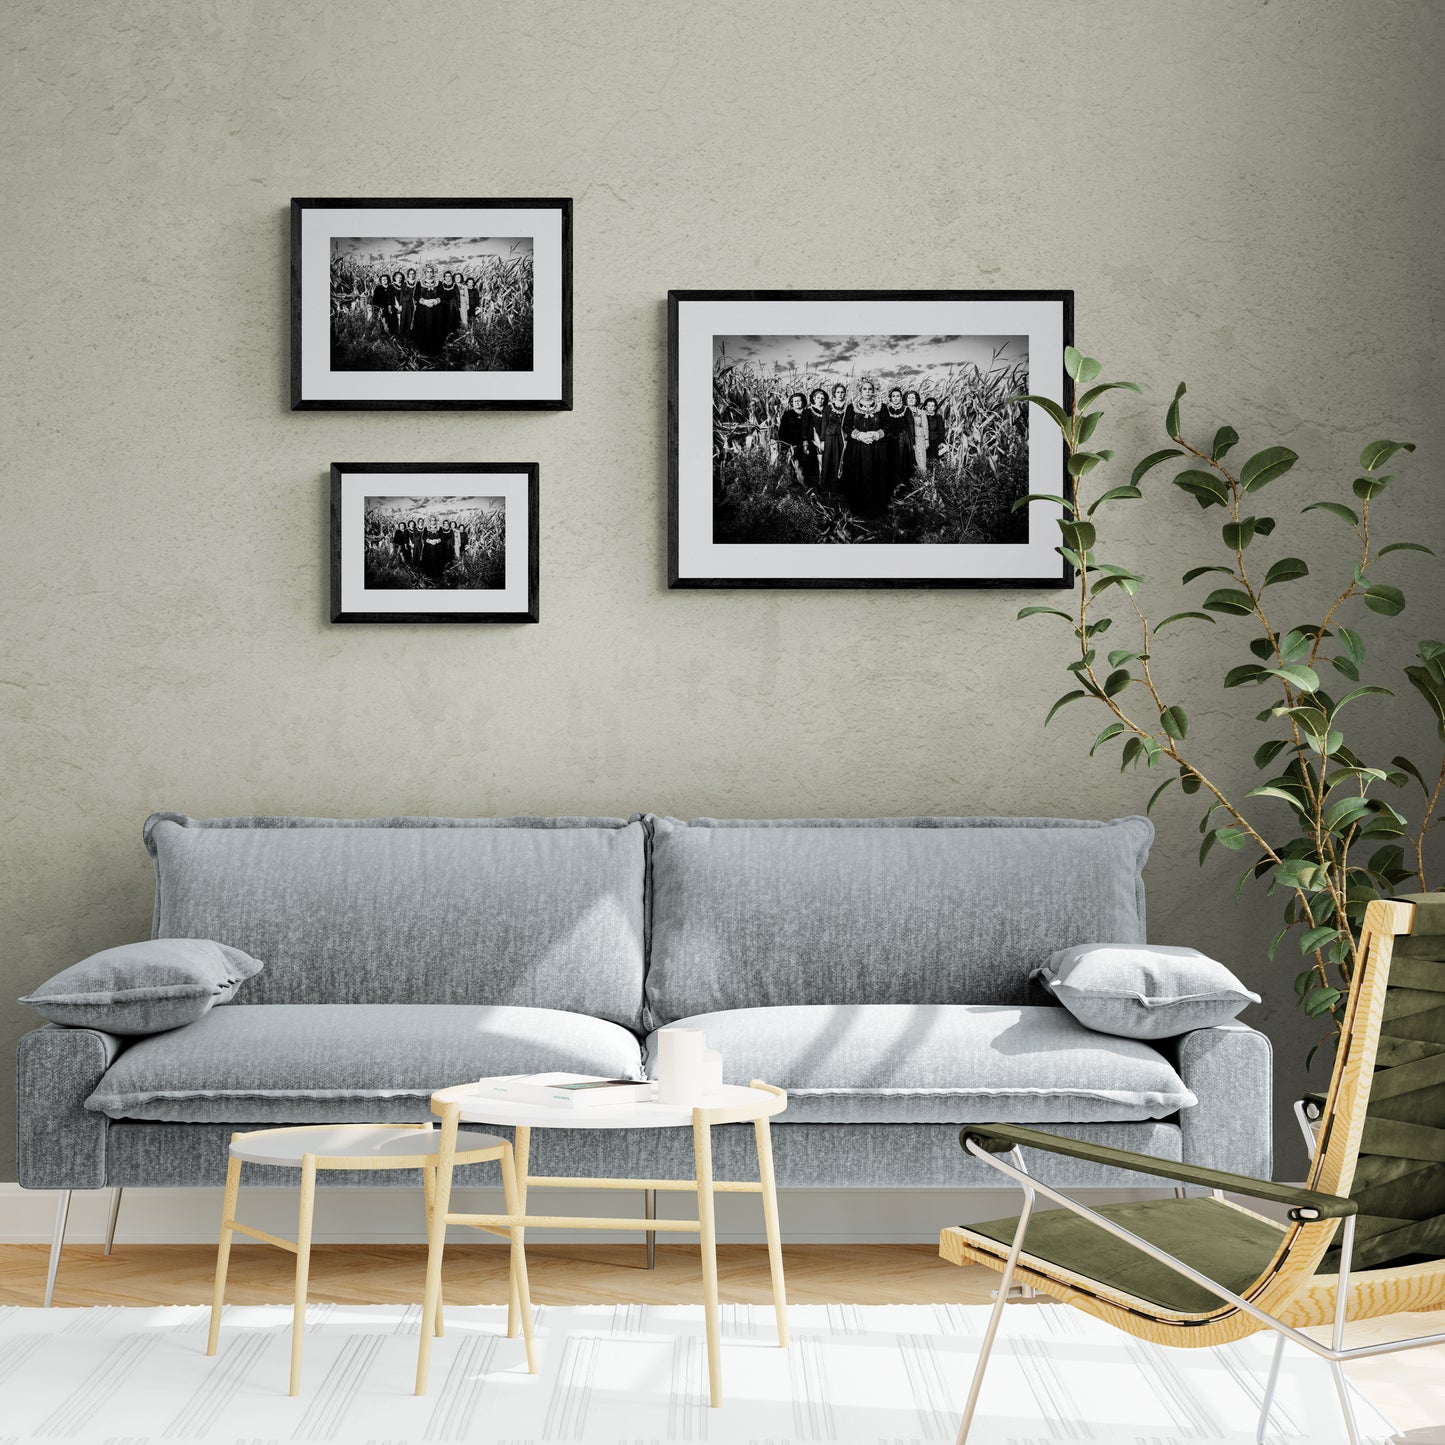 Black and White Photography Wall Art Greece | Cornfield Vyssa Thrace by George Tatakis - framing options